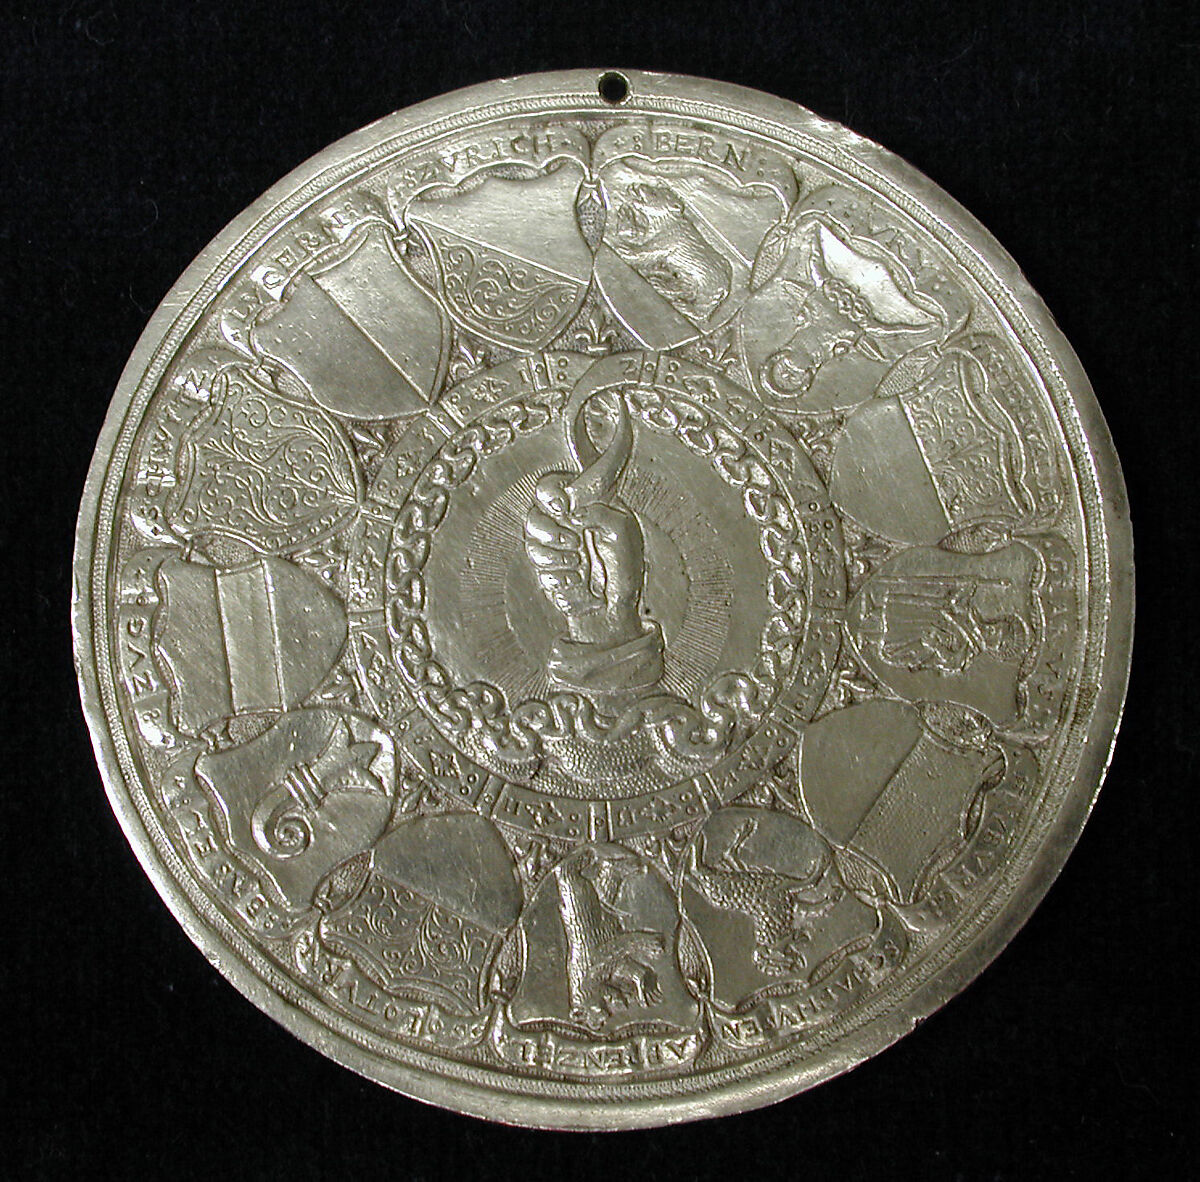 Medal Issued by the Swiss Cantons on the Birth of Princess Claude of France, Hans Jacob Stampfer (Zurich 1505/6–1579 Zurich), Silver, Swiss 